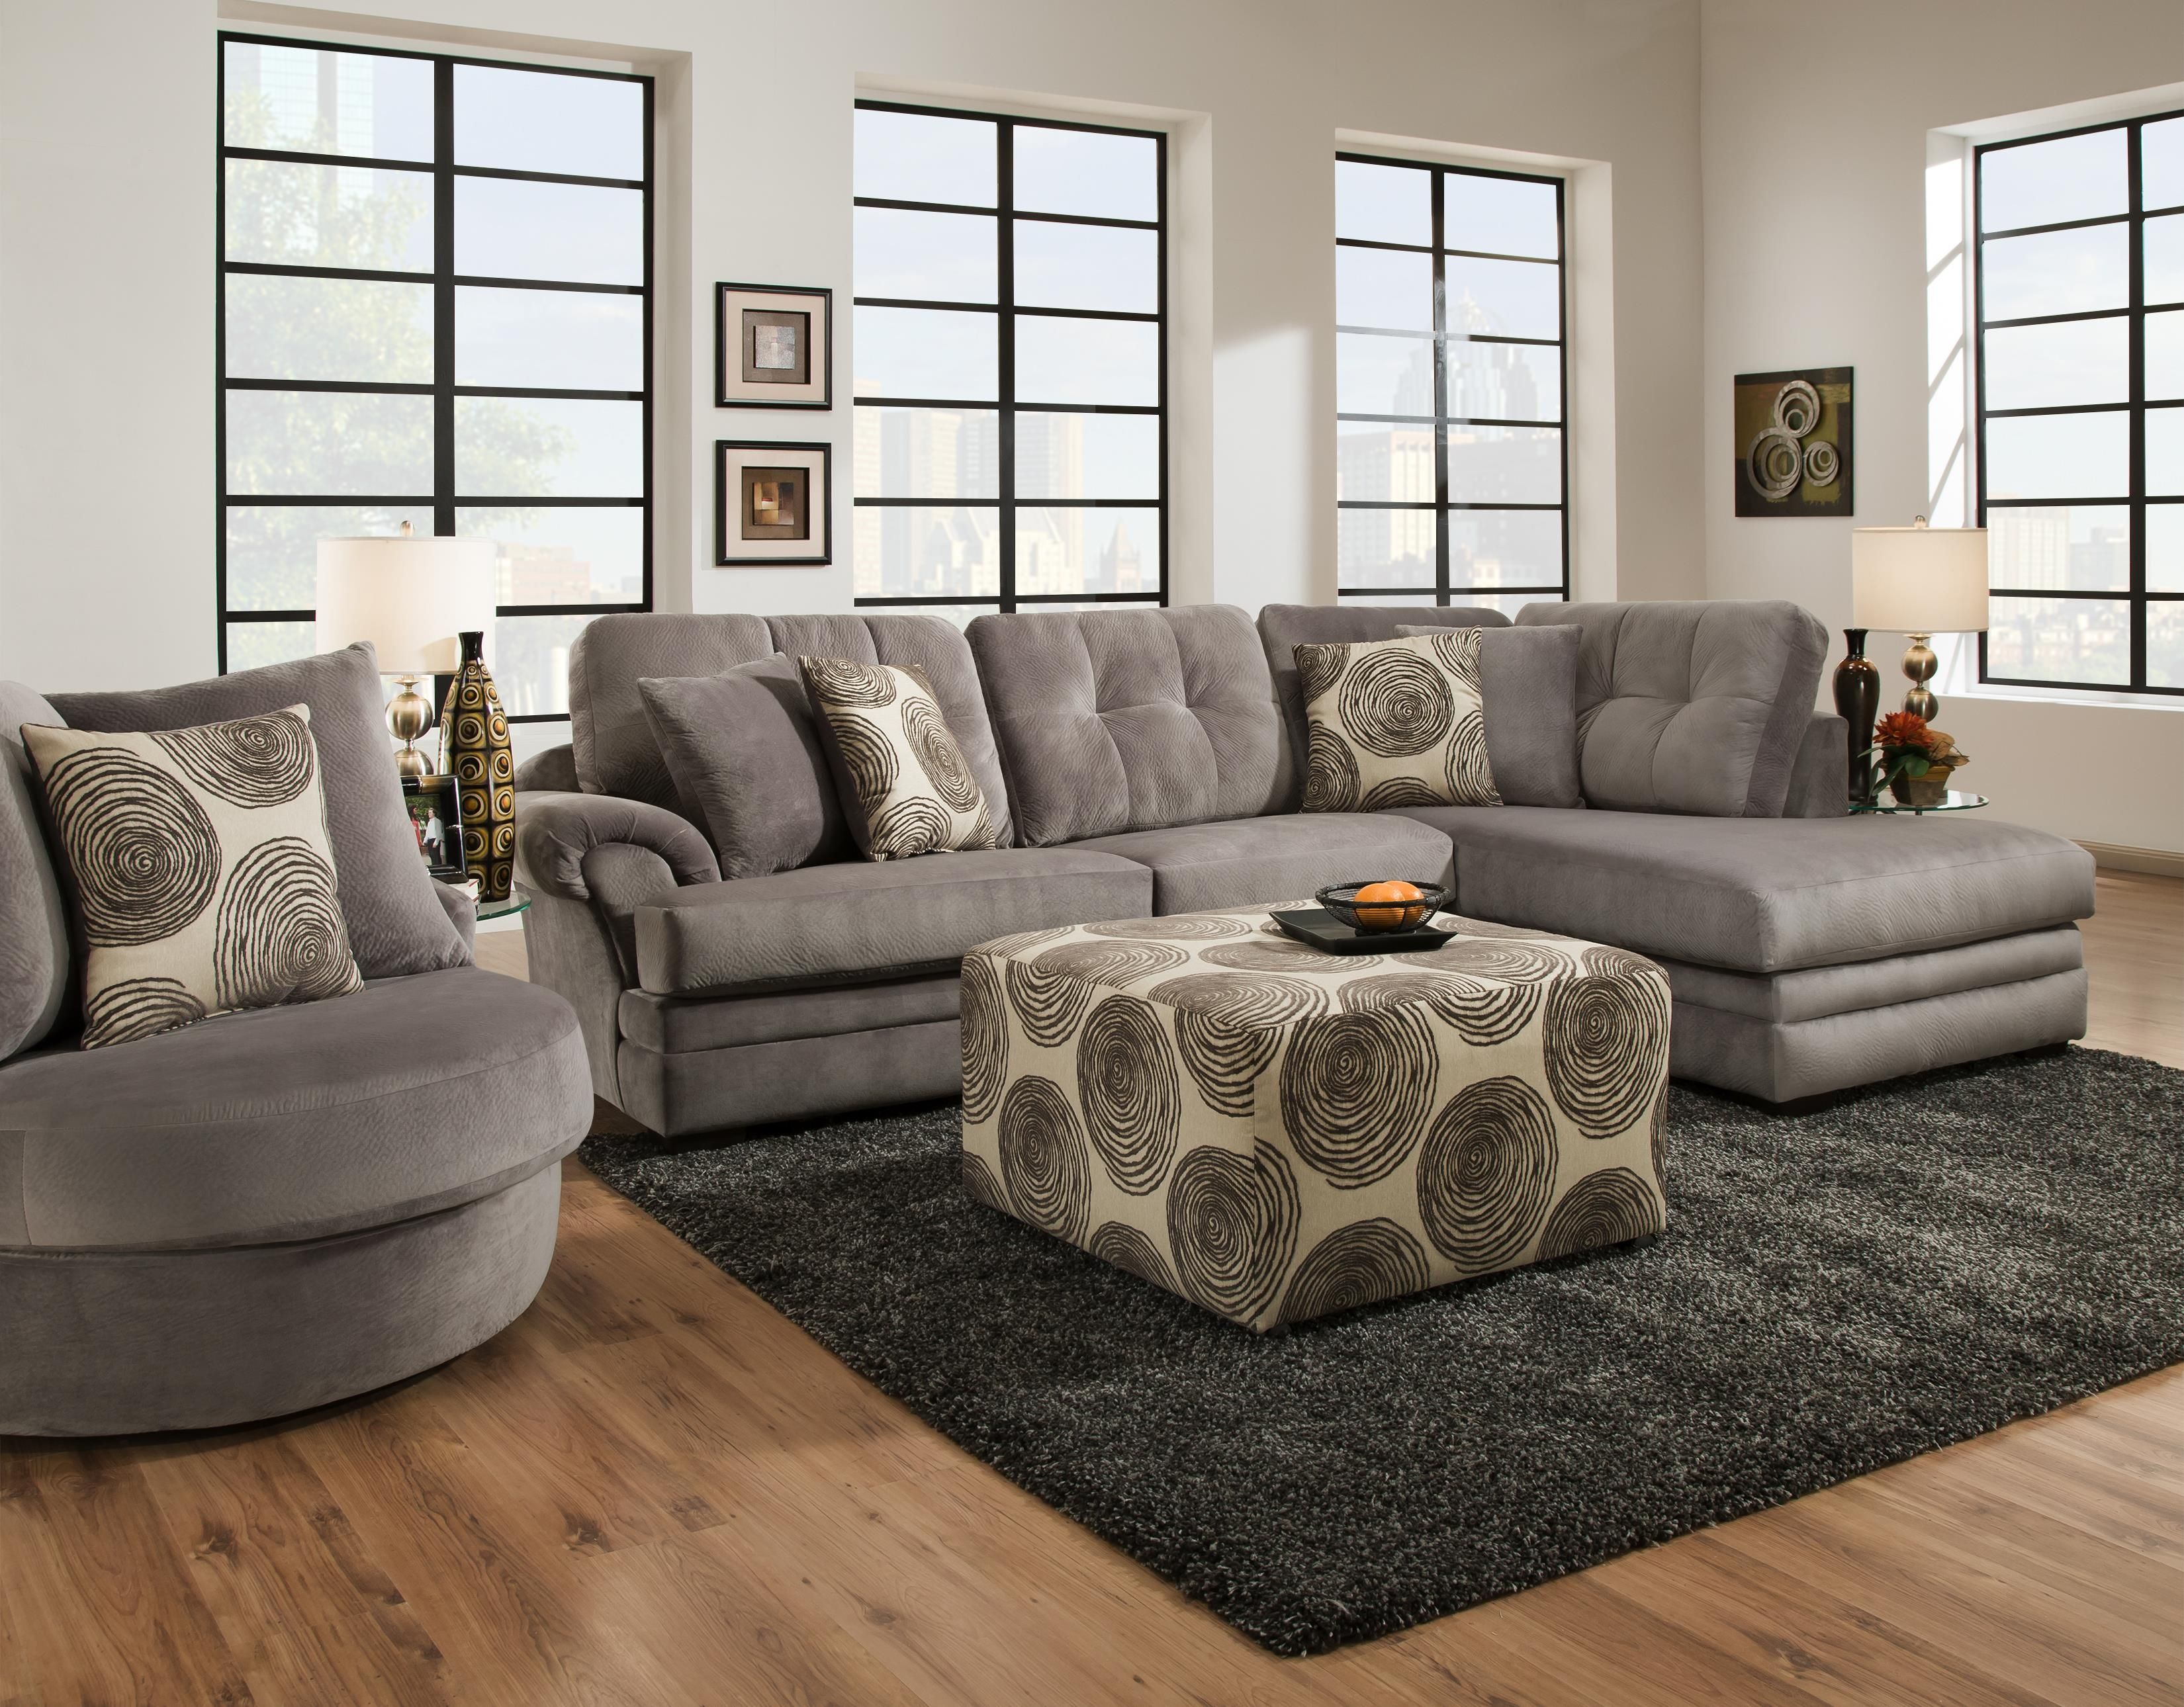 Gray Sectional Sofa In Living Room